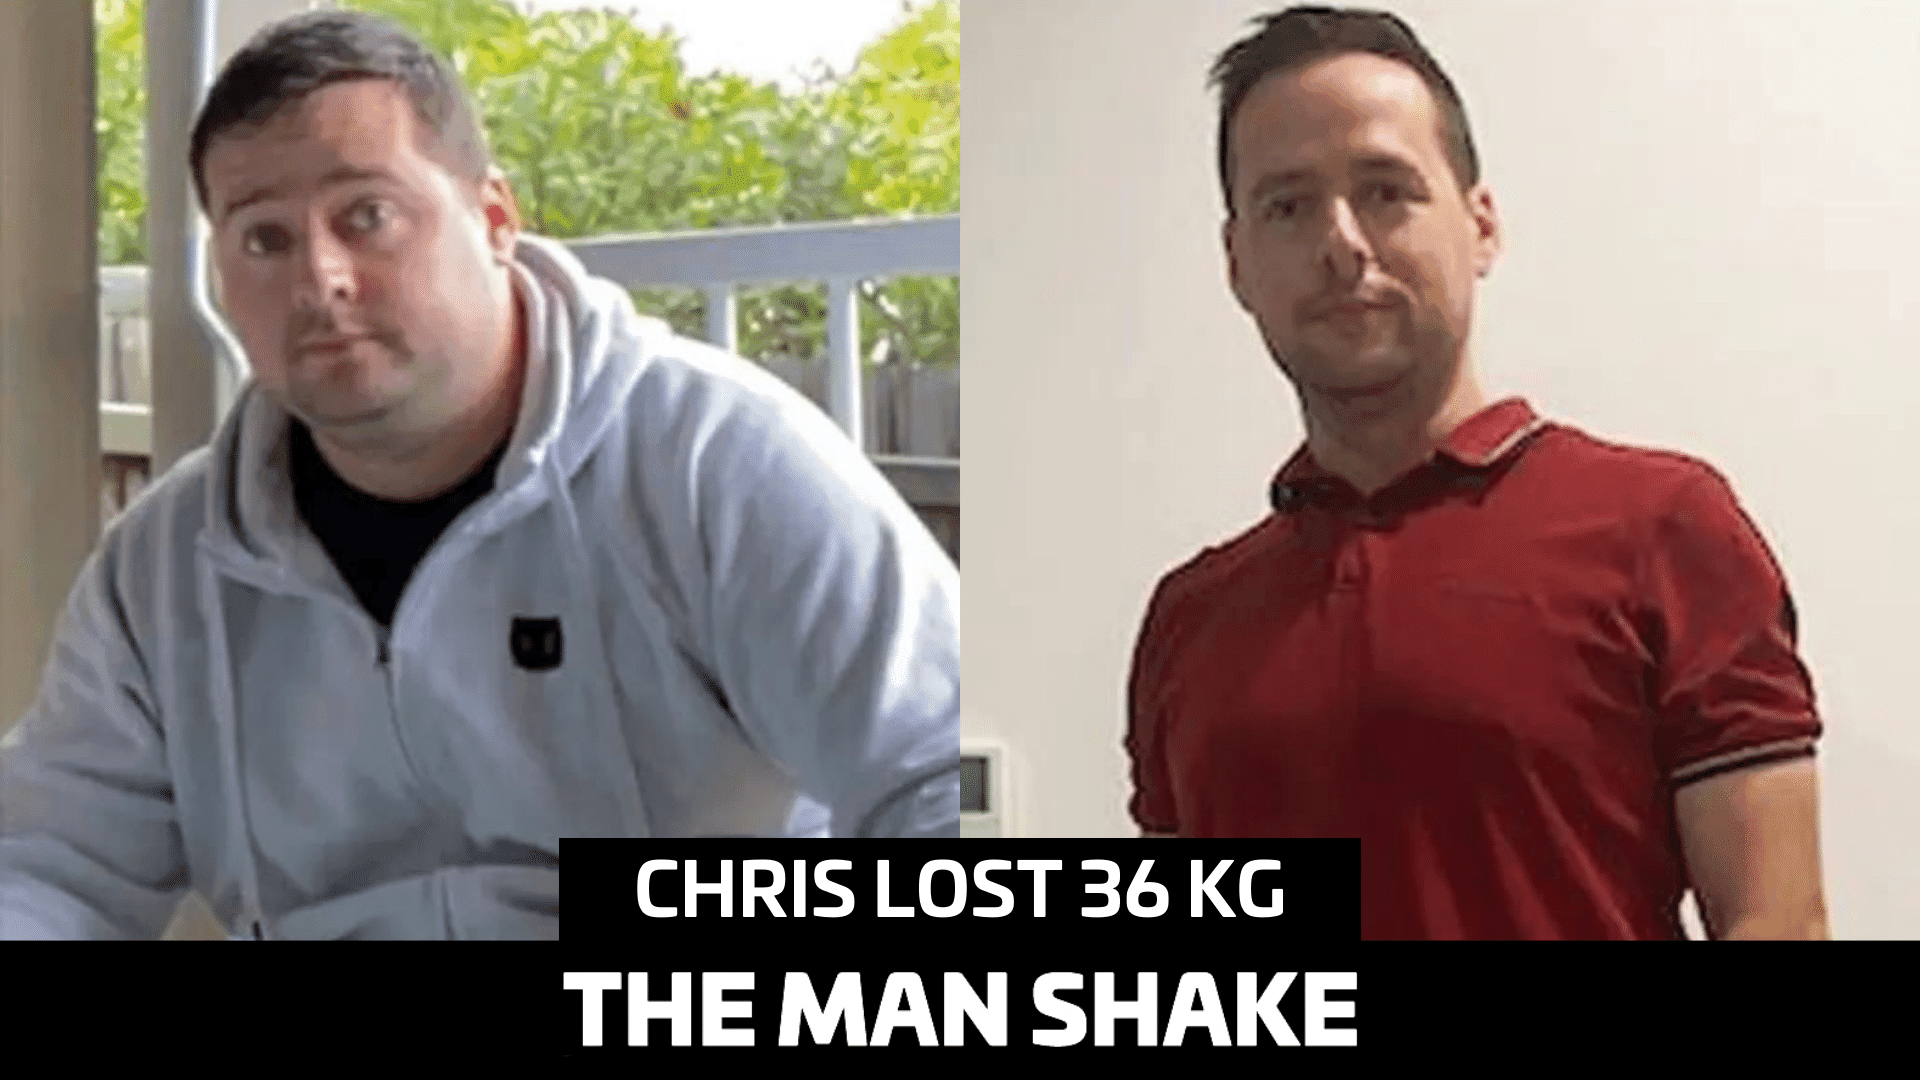 Chris lost 35kg and overcame his excuses!